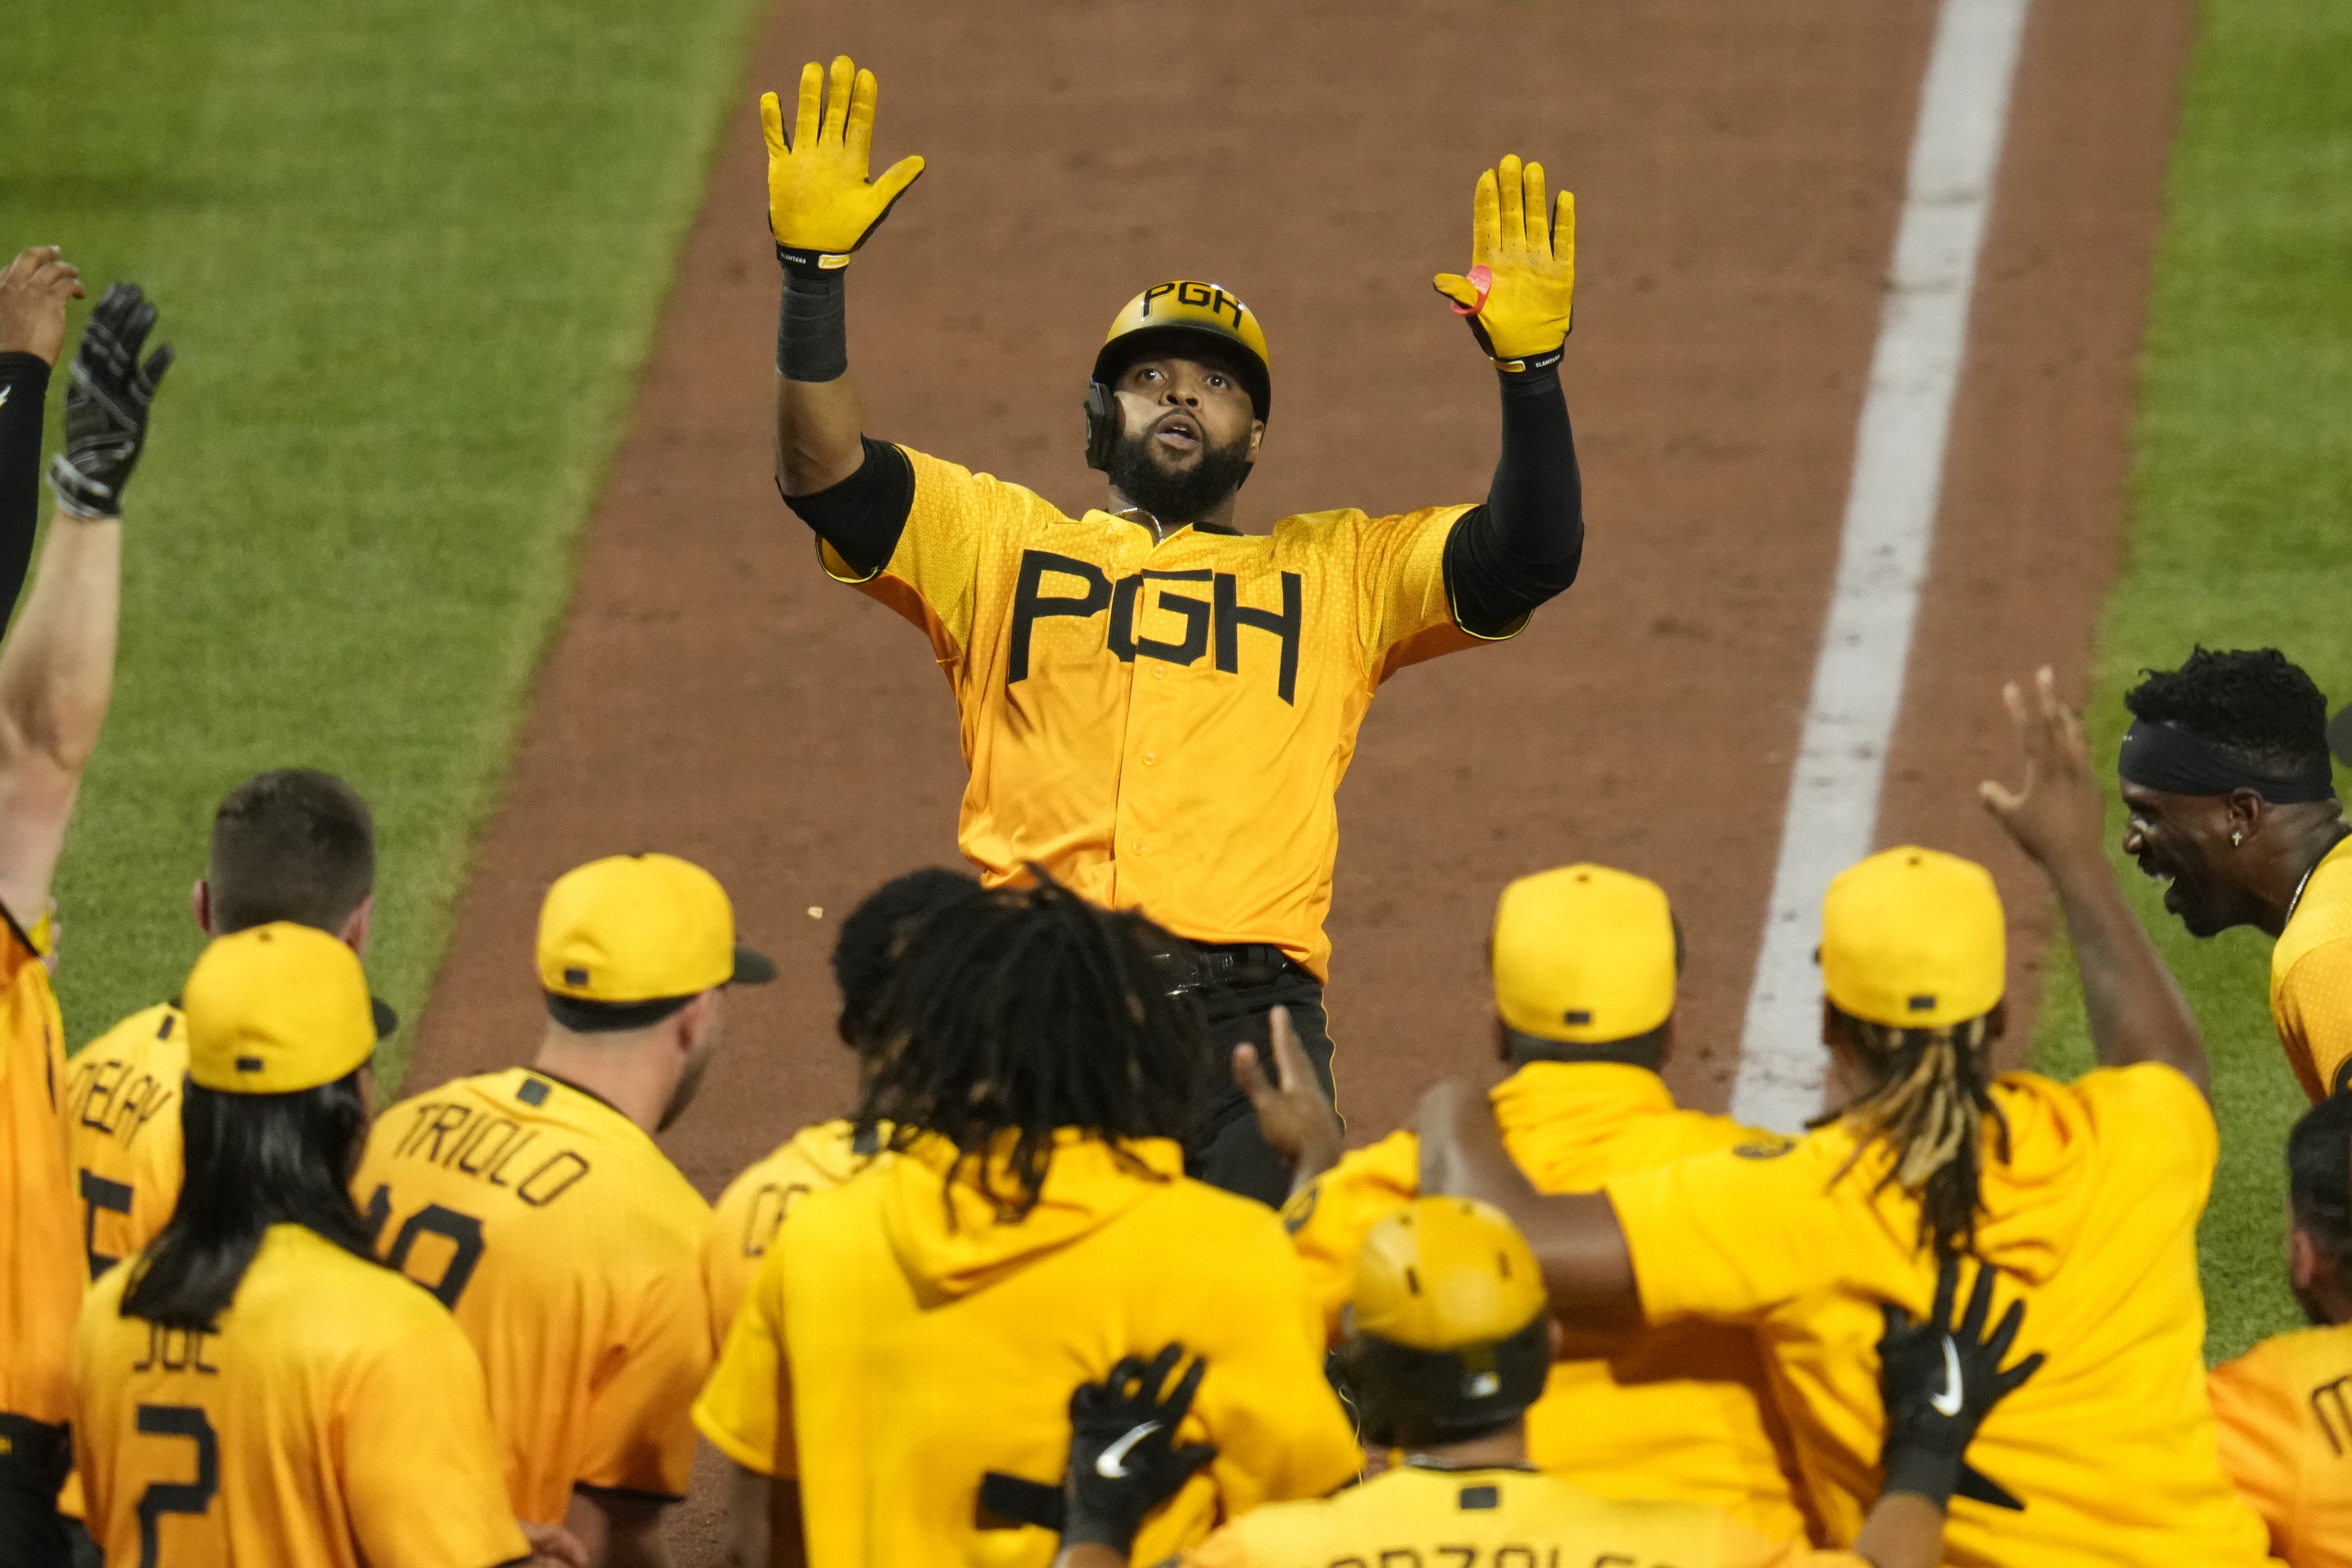 Santana, McCutchen power Pirates to 8-7 walk-off win over Brewers – WPXI